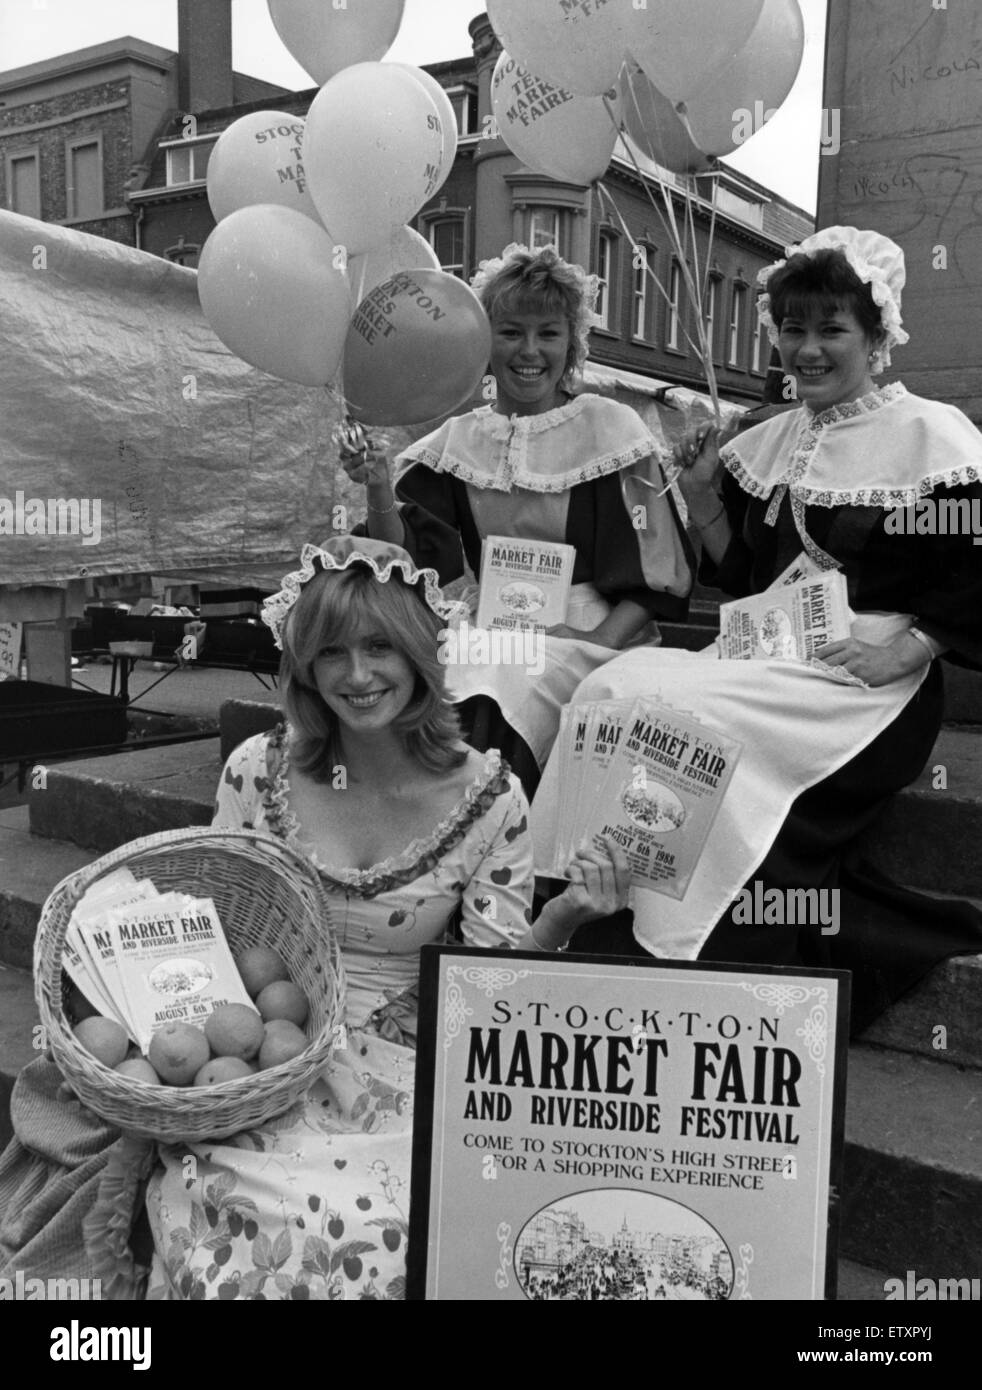 A trio of orange sellers dressed as Nell Gwynne, mingled with stall holders and shopers, handing out their wares and making sure everybody knew about the towns annual market fair. Stockton Market, North East England, 3rd August 1988. Left to Right, Christ Stock Photo